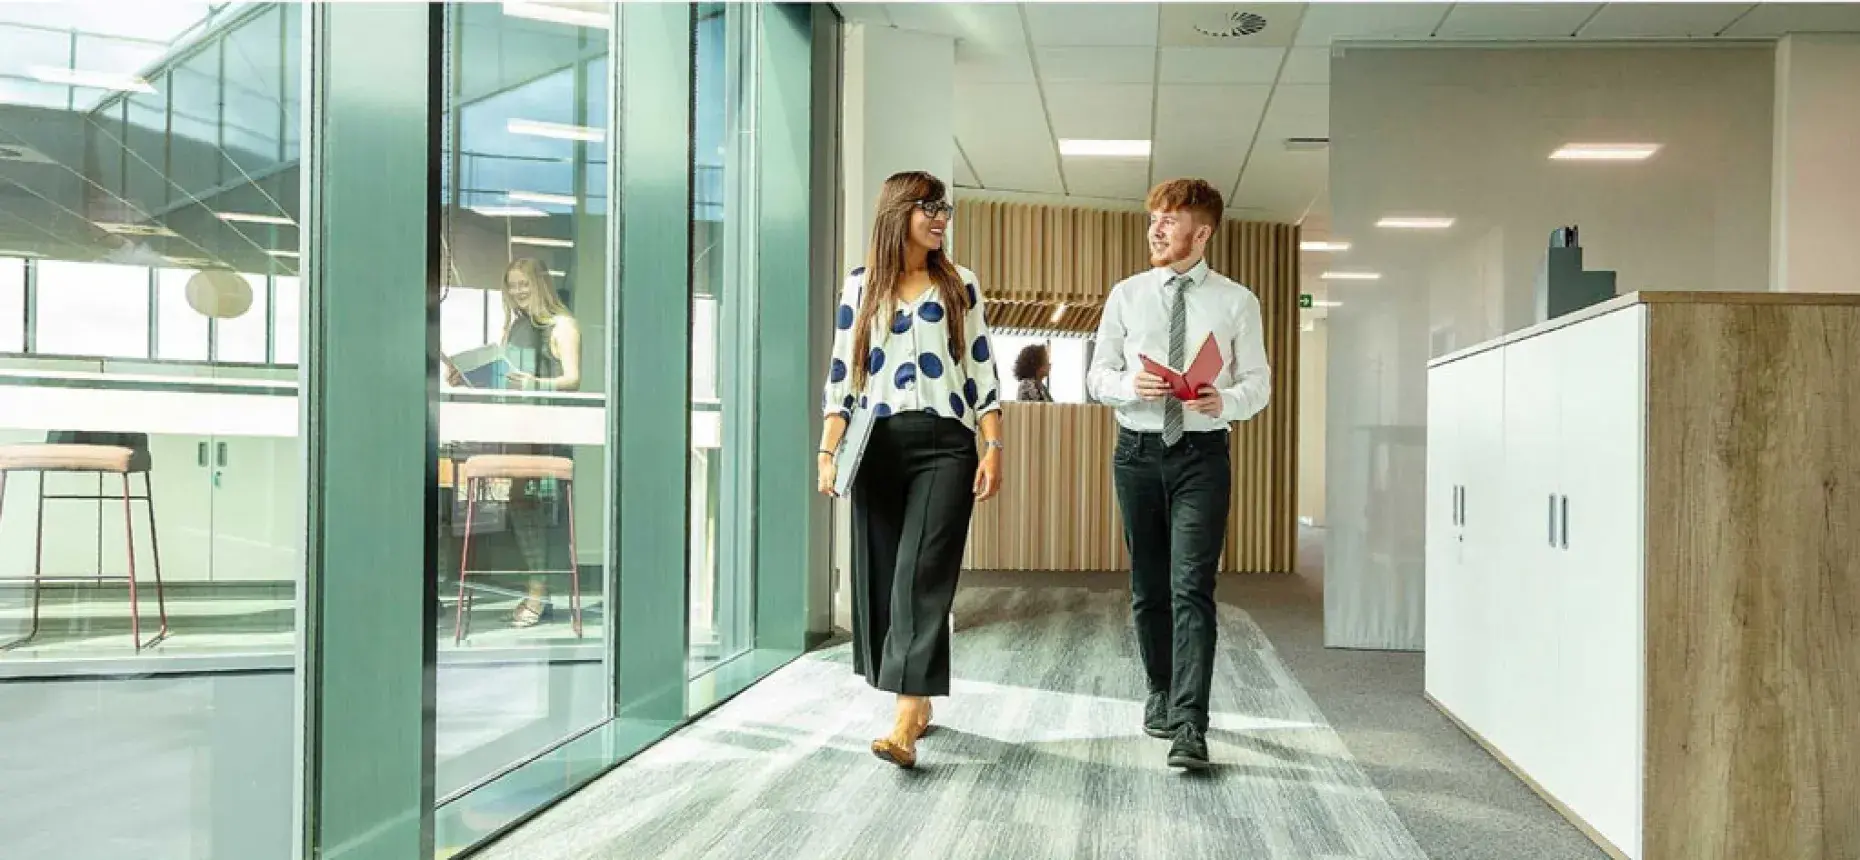 two employees walking through office